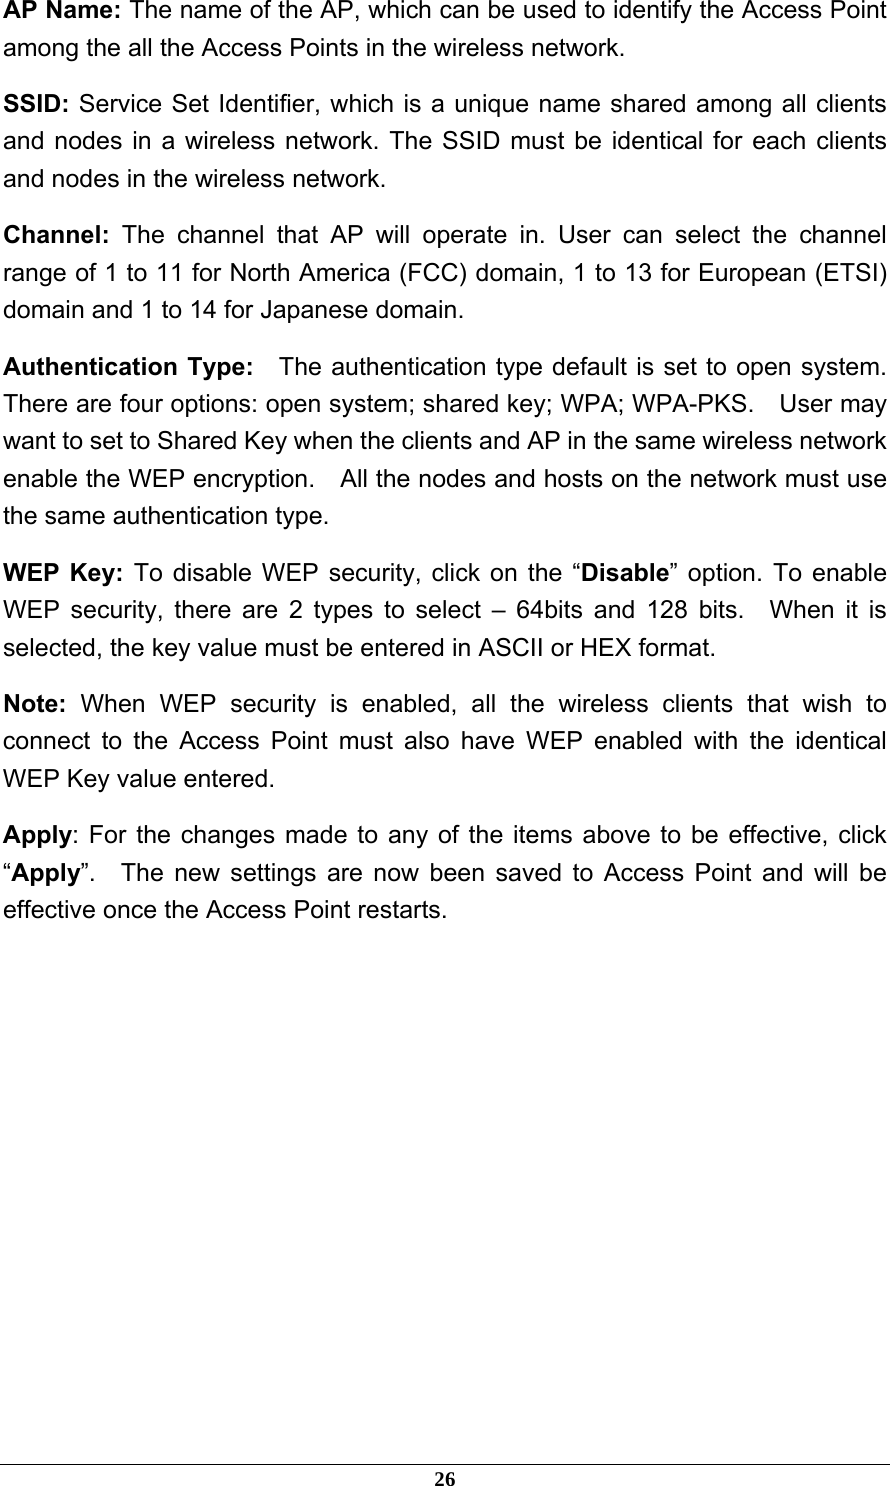 AP Name: The name of the AP, which can be used to identify the Access Point among the all the Access Points in the wireless network. SSID: Service Set Identifier, which is a unique name shared among all clients and nodes in a wireless network. The SSID must be identical for each clients and nodes in the wireless network. Channel:  The channel that AP will operate in. User can select the channel range of 1 to 11 for North America (FCC) domain, 1 to 13 for European (ETSI) domain and 1 to 14 for Japanese domain. Authentication Type:    The authentication type default is set to open system.   There are four options: open system; shared key; WPA; WPA-PKS.    User may want to set to Shared Key when the clients and AP in the same wireless network enable the WEP encryption.    All the nodes and hosts on the network must use the same authentication type.     WEP Key: To disable WEP security, click on the “Disable” option. To enable WEP security, there are 2 types to select – 64bits and 128 bits.  When it is selected, the key value must be entered in ASCII or HEX format. Note: When WEP security is enabled, all the wireless clients that wish to connect to the Access Point must also have WEP enabled with the identical WEP Key value entered. Apply: For the changes made to any of the items above to be effective, click “Apply”.  The new settings are now been saved to Access Point and will be effective once the Access Point restarts.              26 